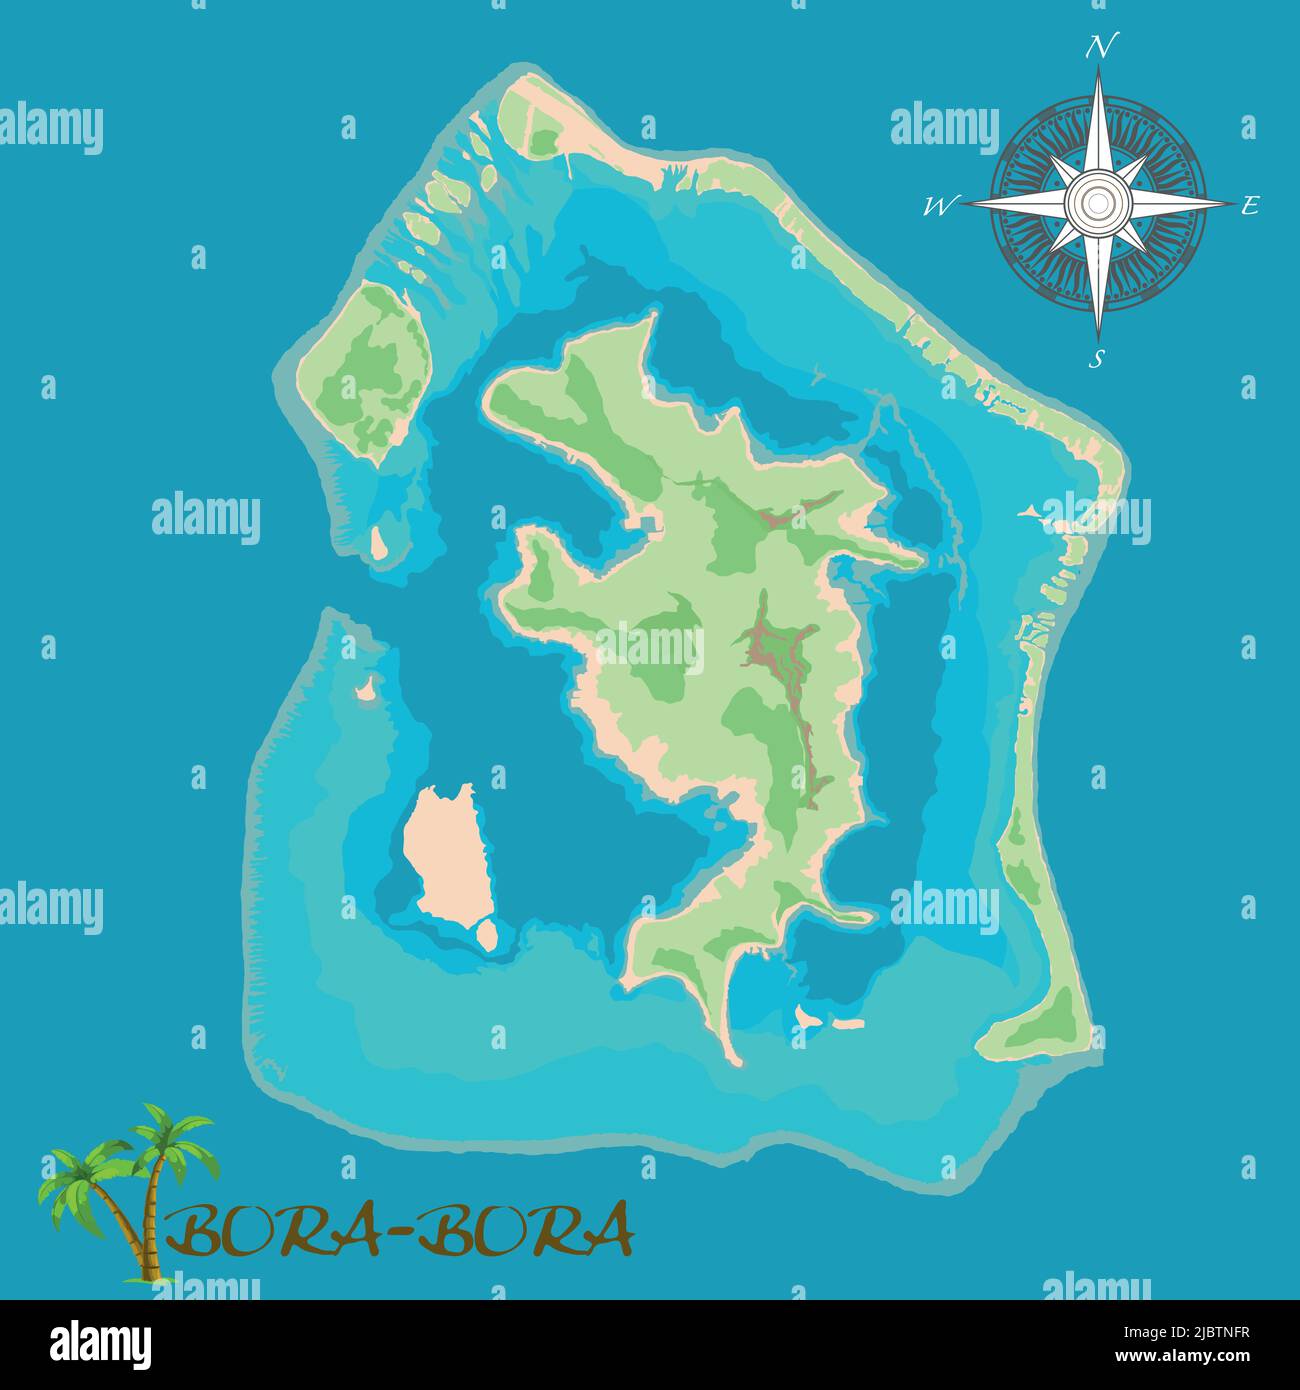 Bora-Bora Island. Realistic satellite background map. Drawn with cartographic accuracy. A bird's-eye view. Stock Vector